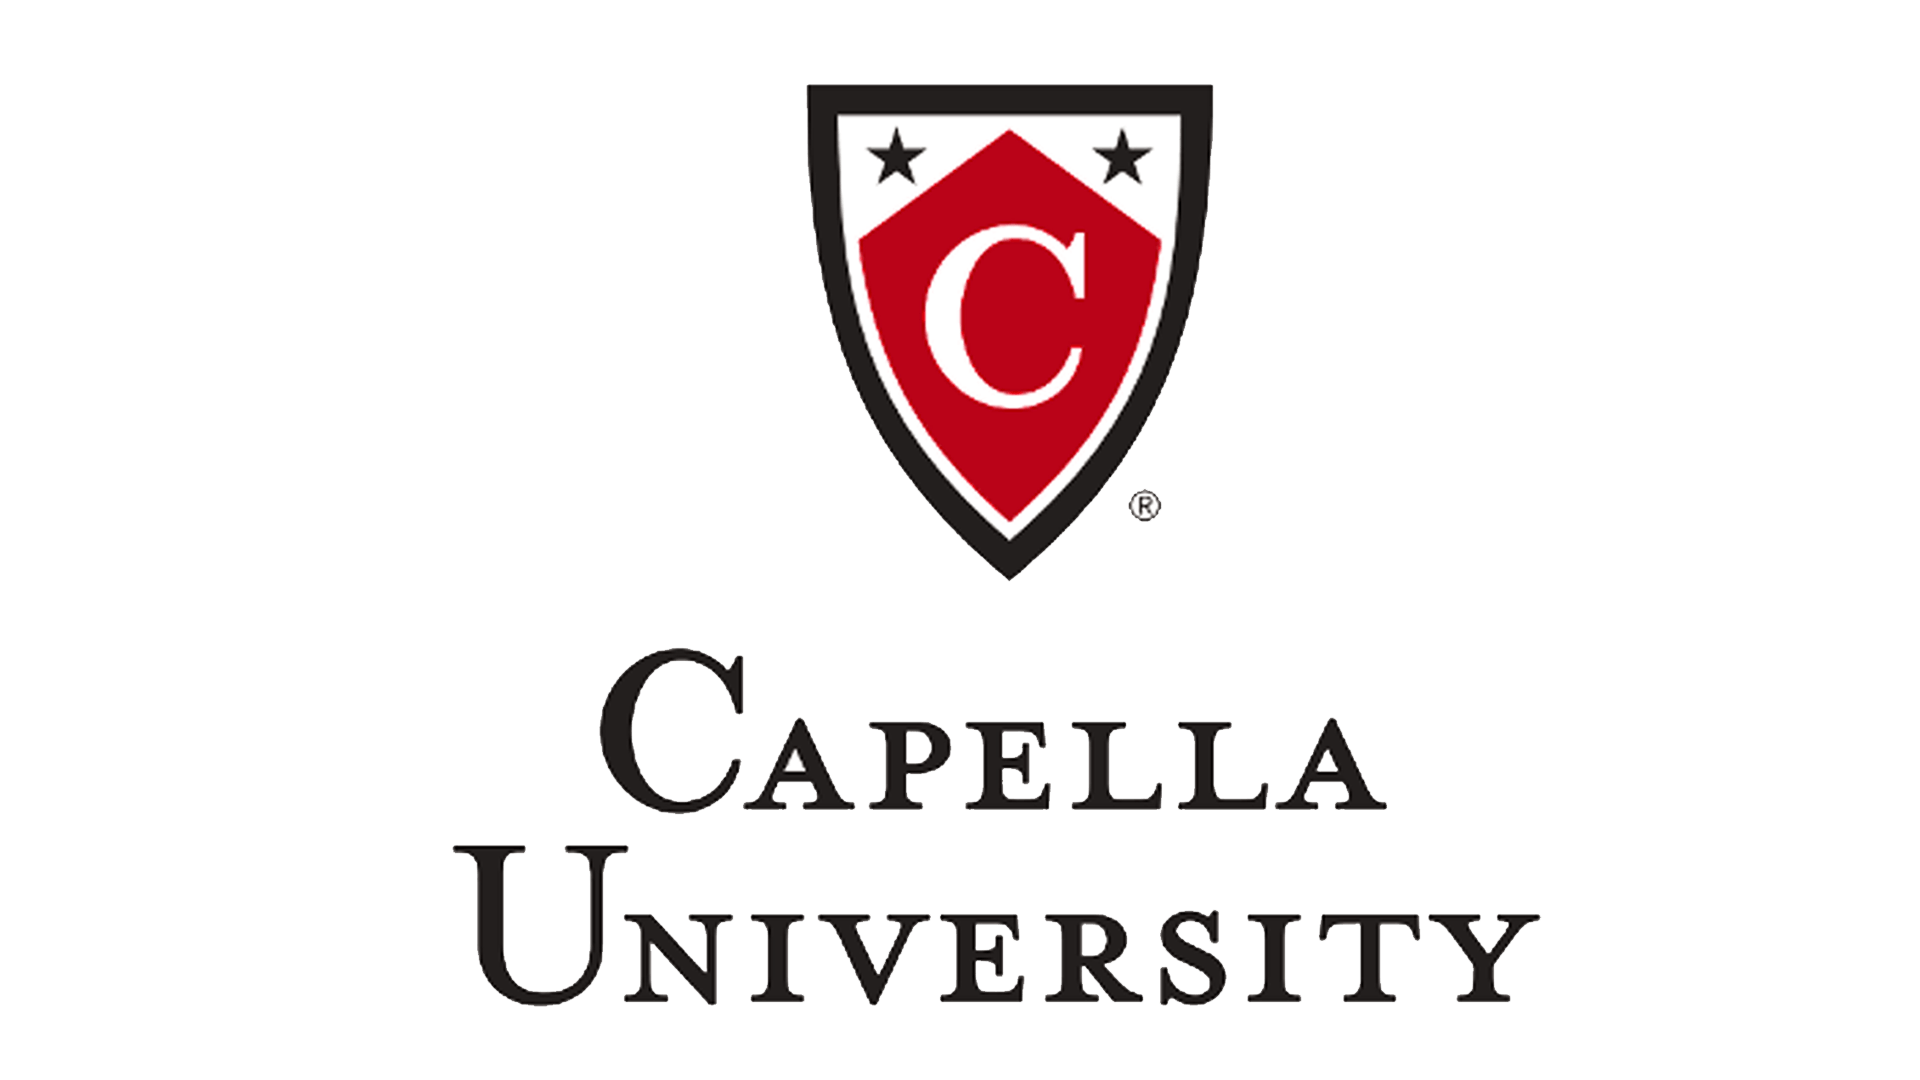 Universities Logo - Meaning Capella University logo and symbol | history and evolution